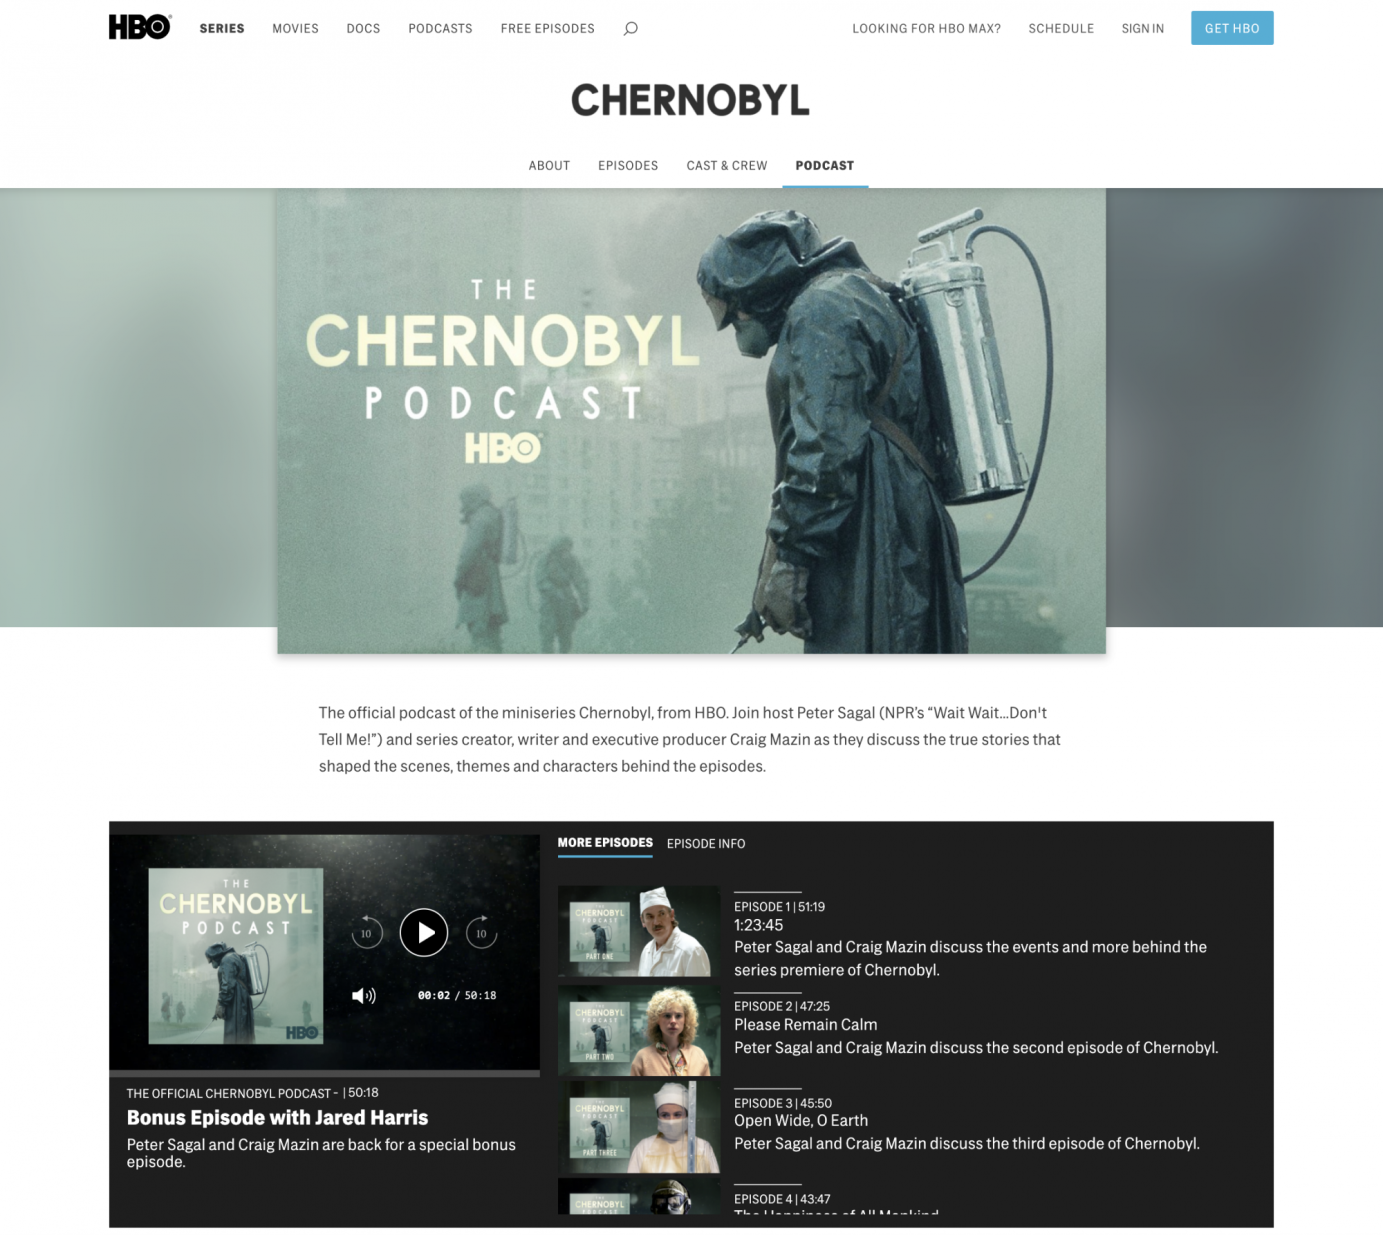 The-Chernobyl-Podcast-HBO-Website.png